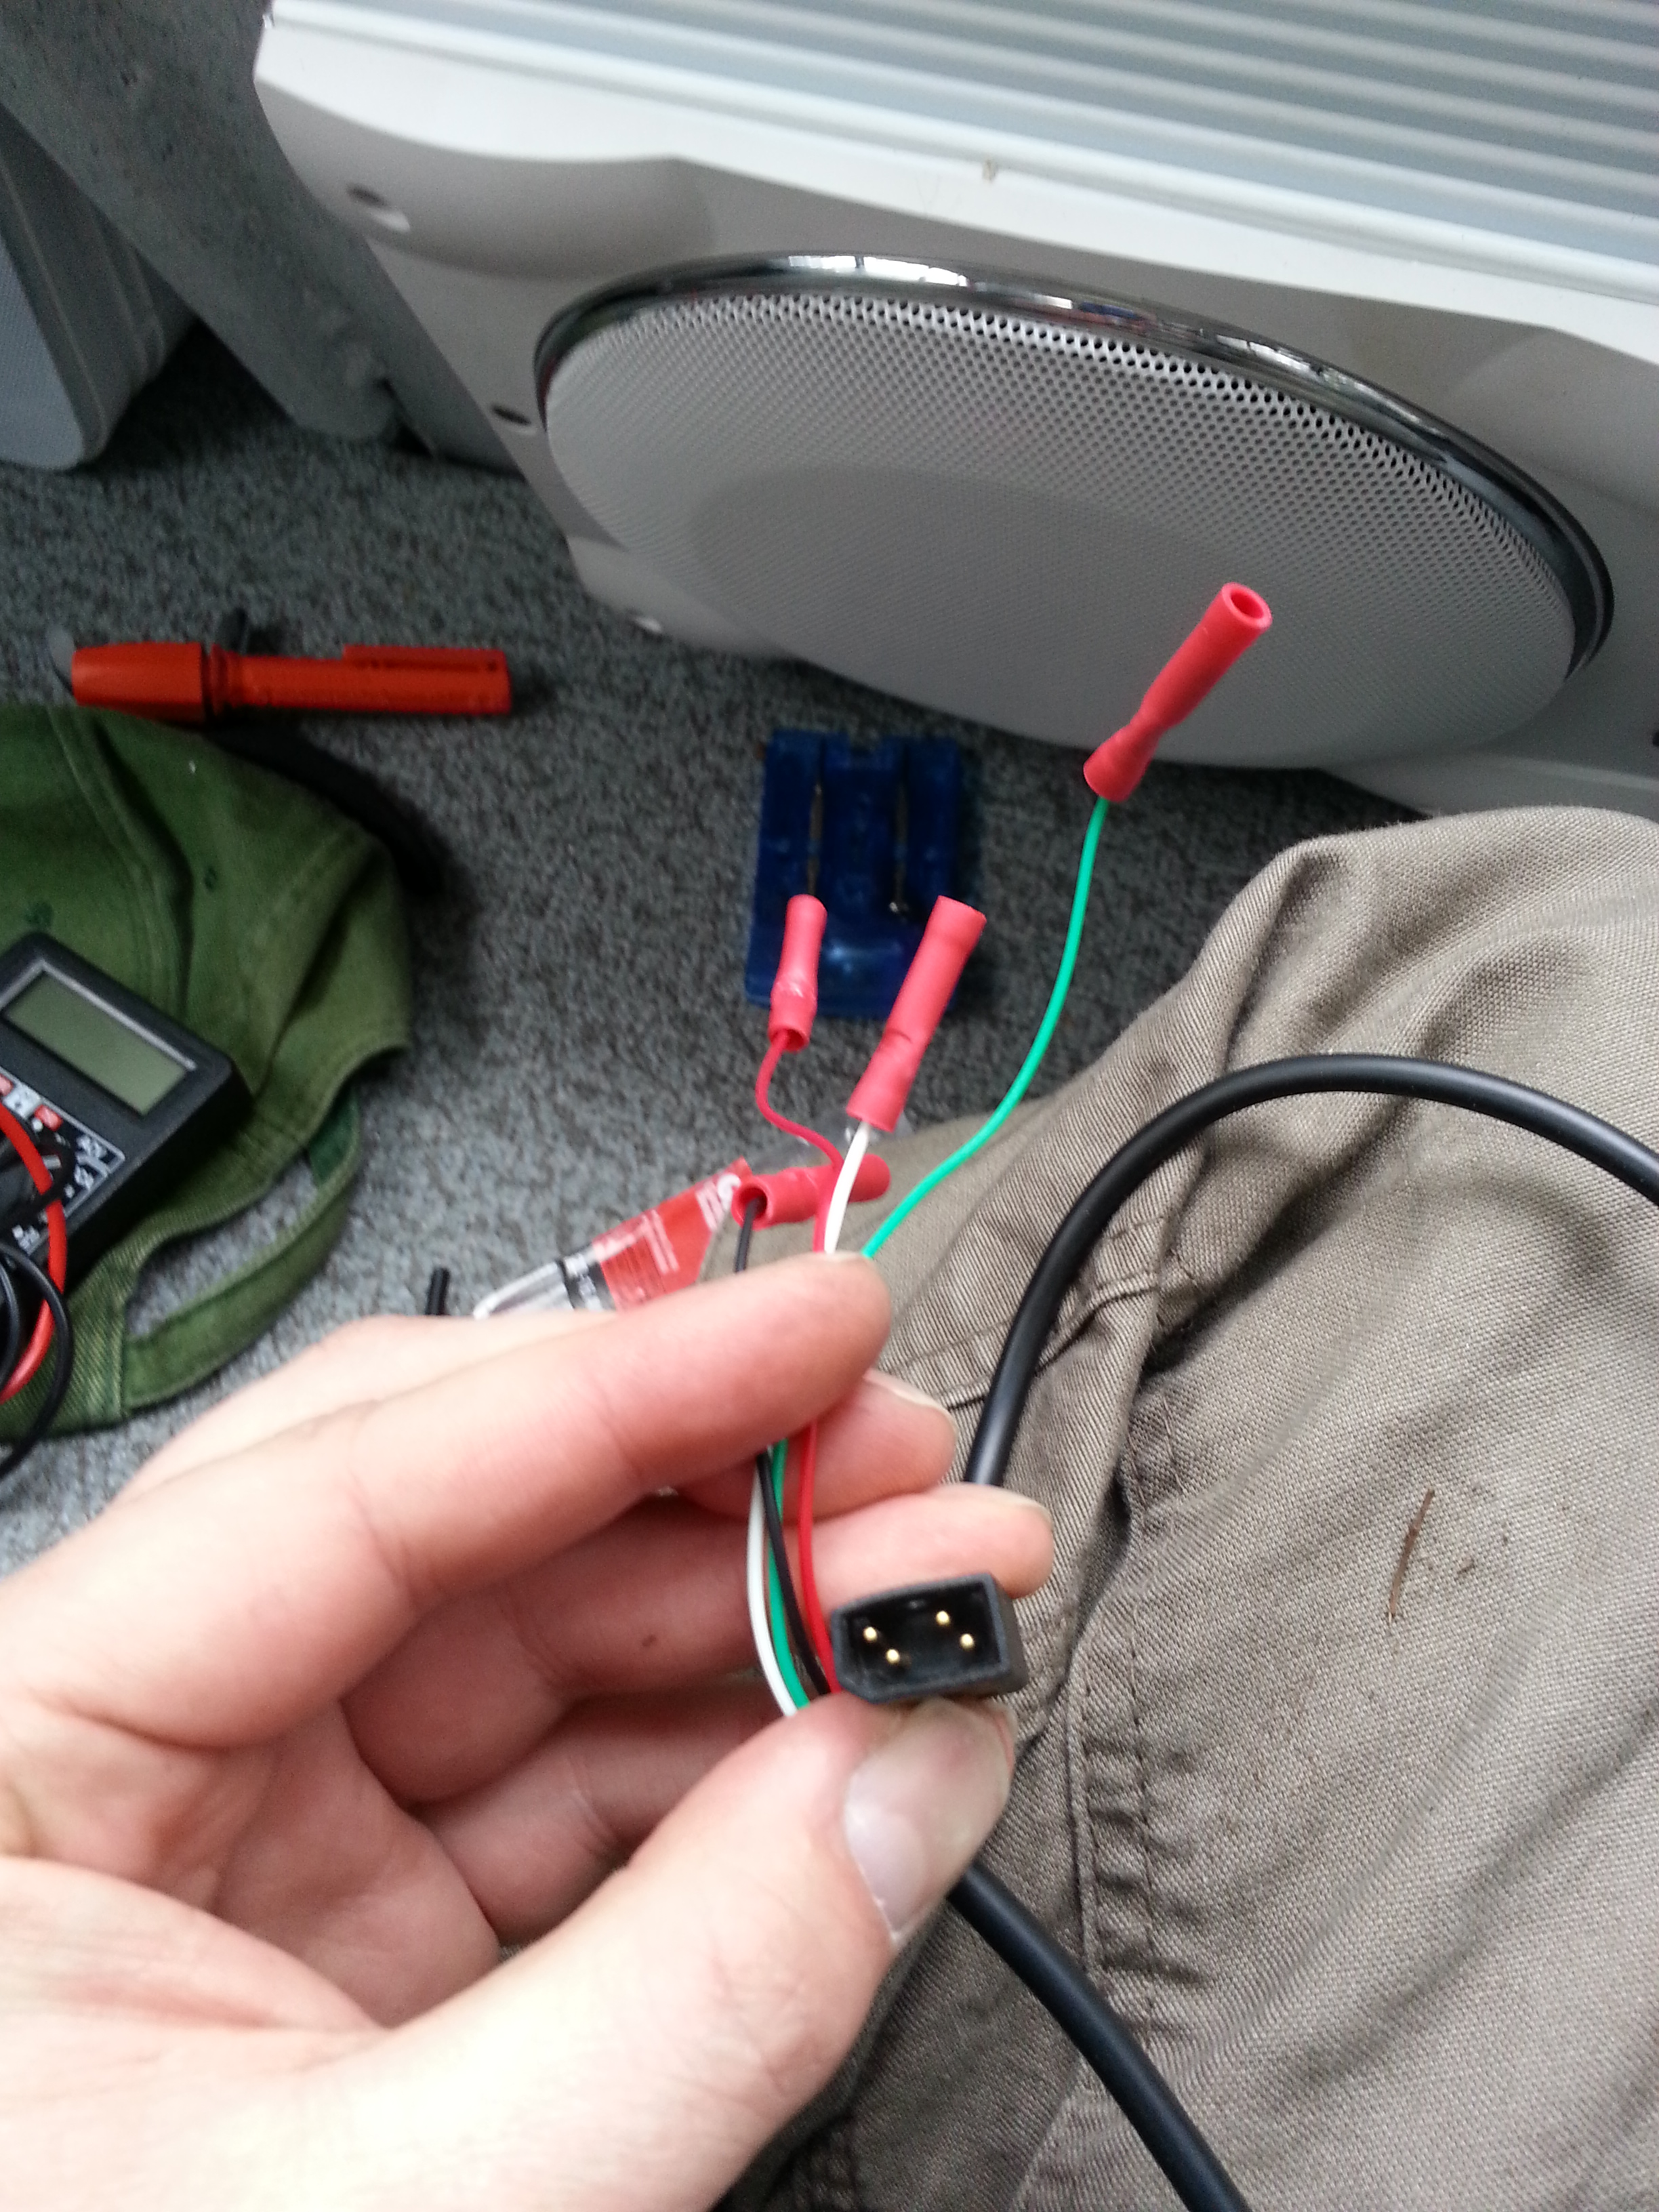 998c si hd NMEA out to Cobra radio - which wires?